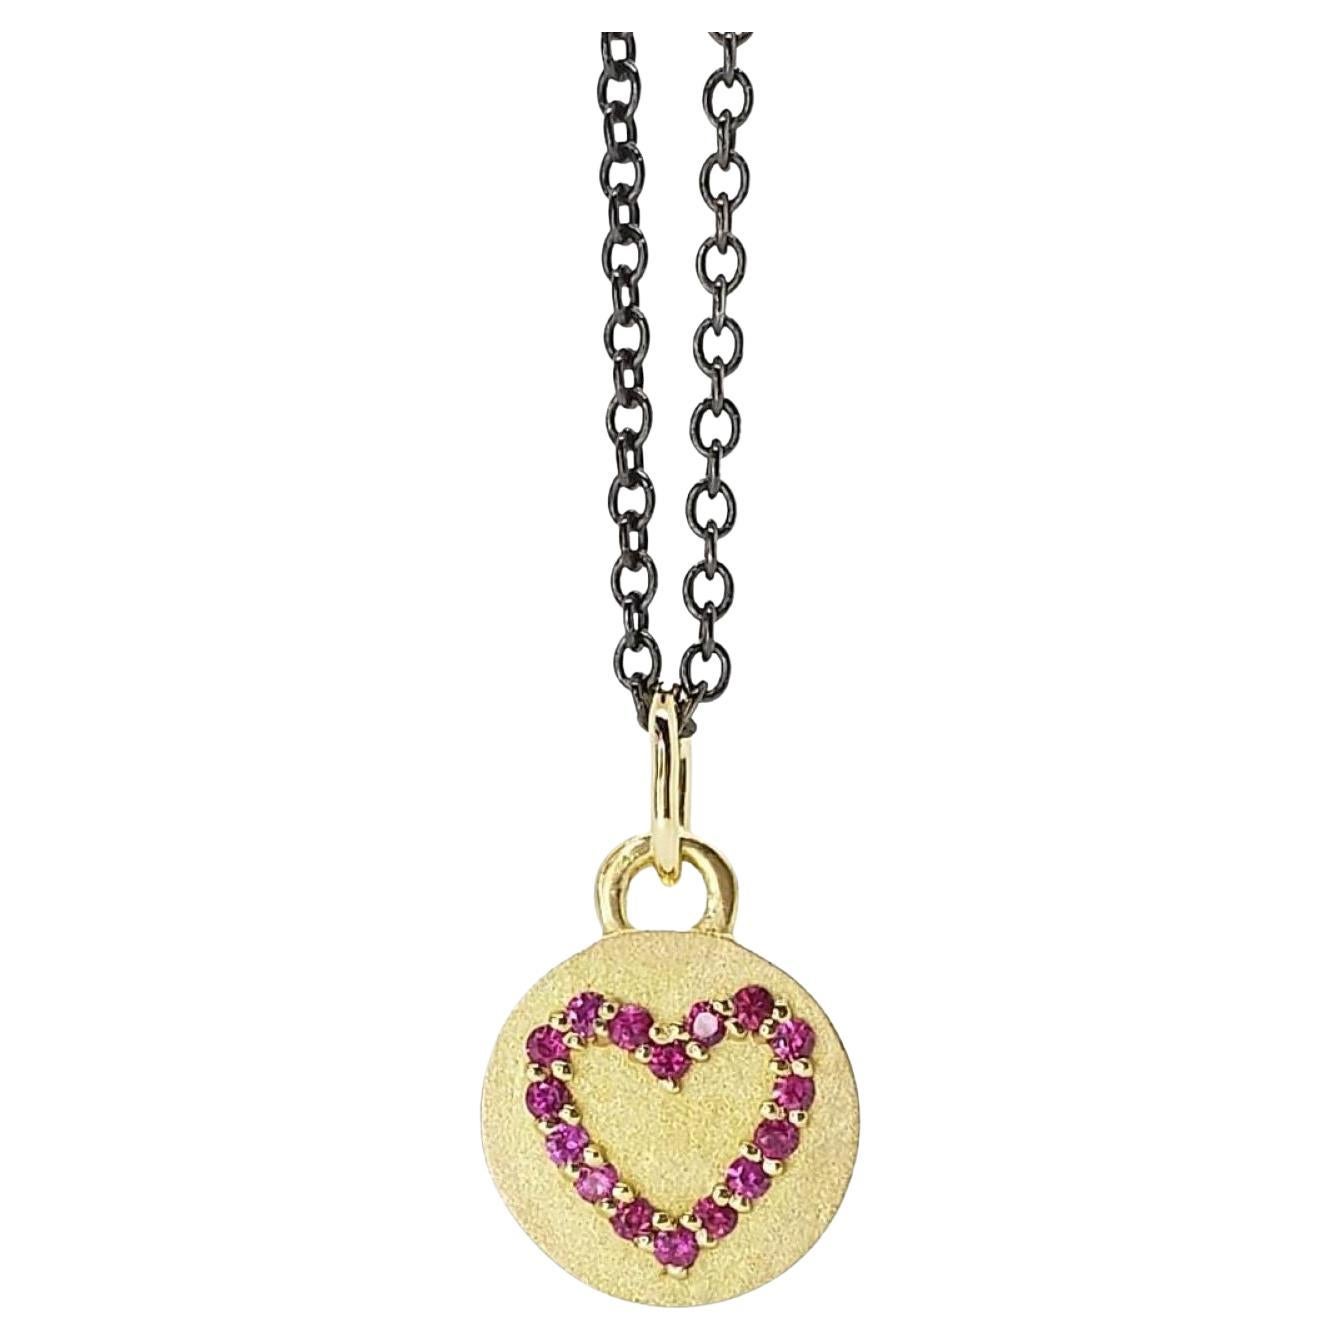 A red heart symbolizes Love, especially in rubies and gold. Get ready for Valentines or just show the love to your special person; your partner, yourself, your mother, your sister, your grandmother, your aunt, your friend, your boss, your colleague,